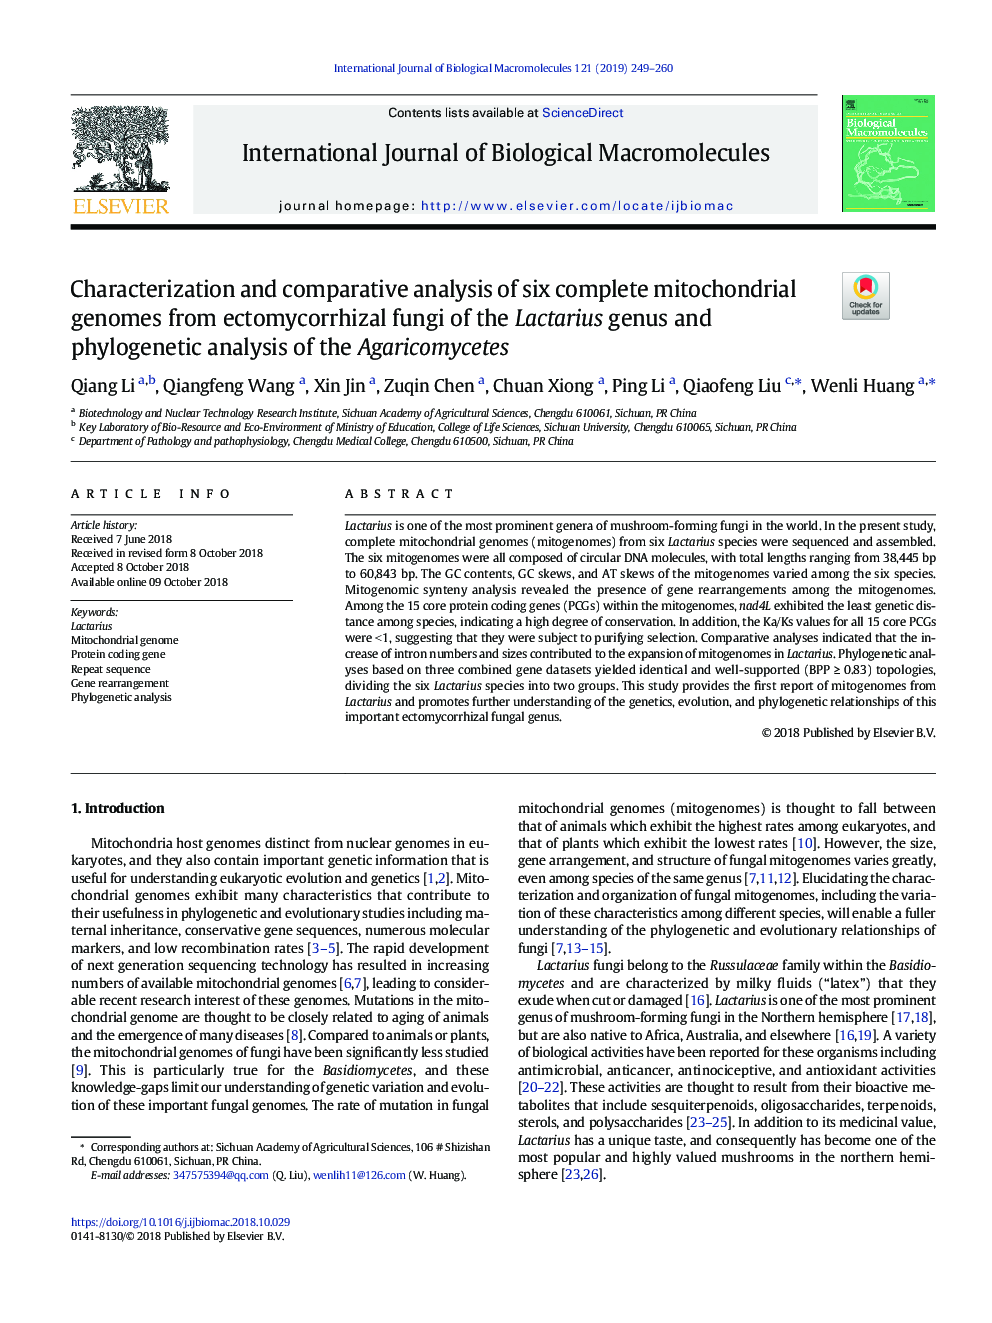 Characterization and comparative analysis of six complete mitochondrial genomes from ectomycorrhizal fungi of the Lactarius genus and phylogenetic analysis of the Agaricomycetes